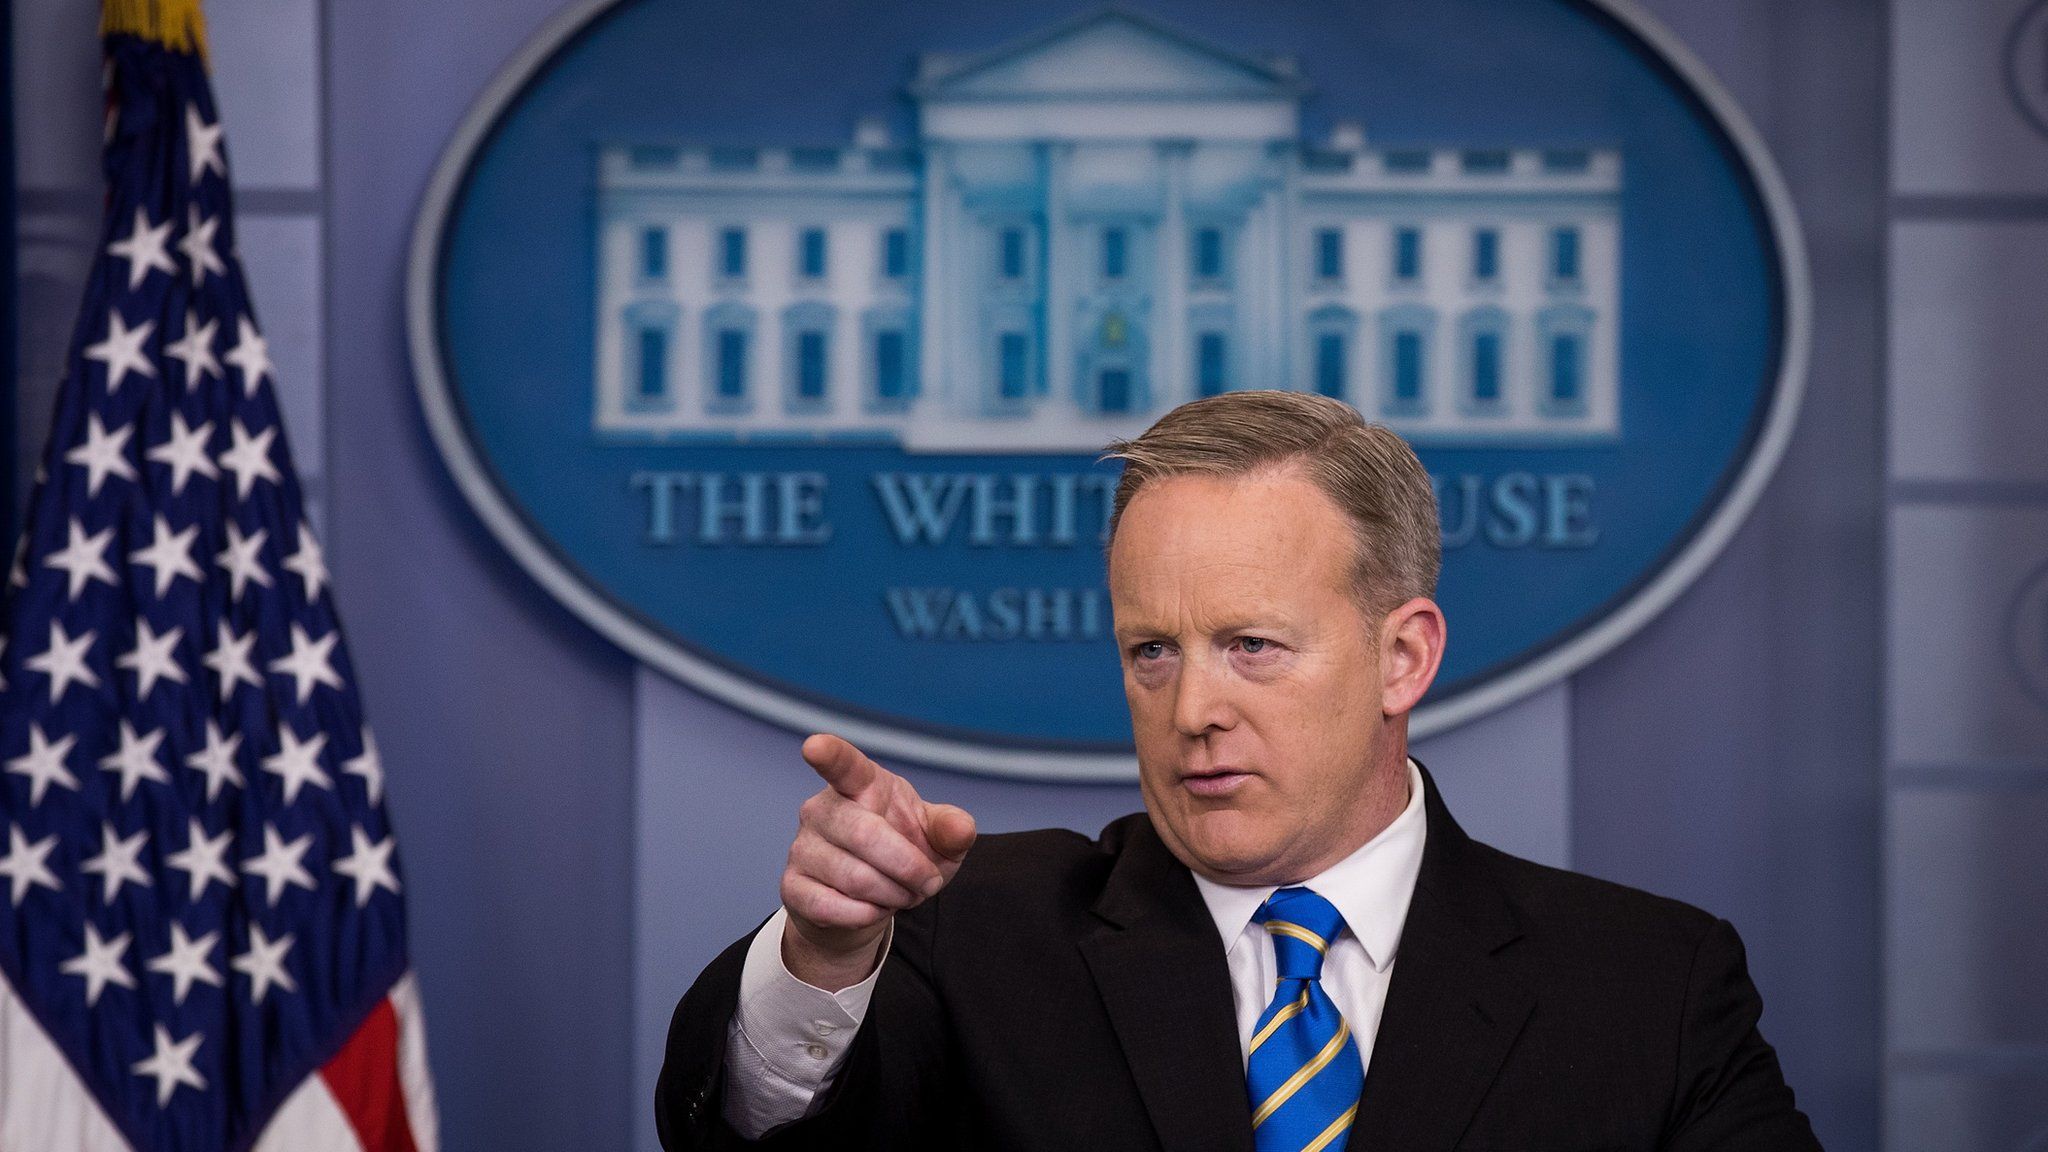 Sean Spicer taking questions at the White House